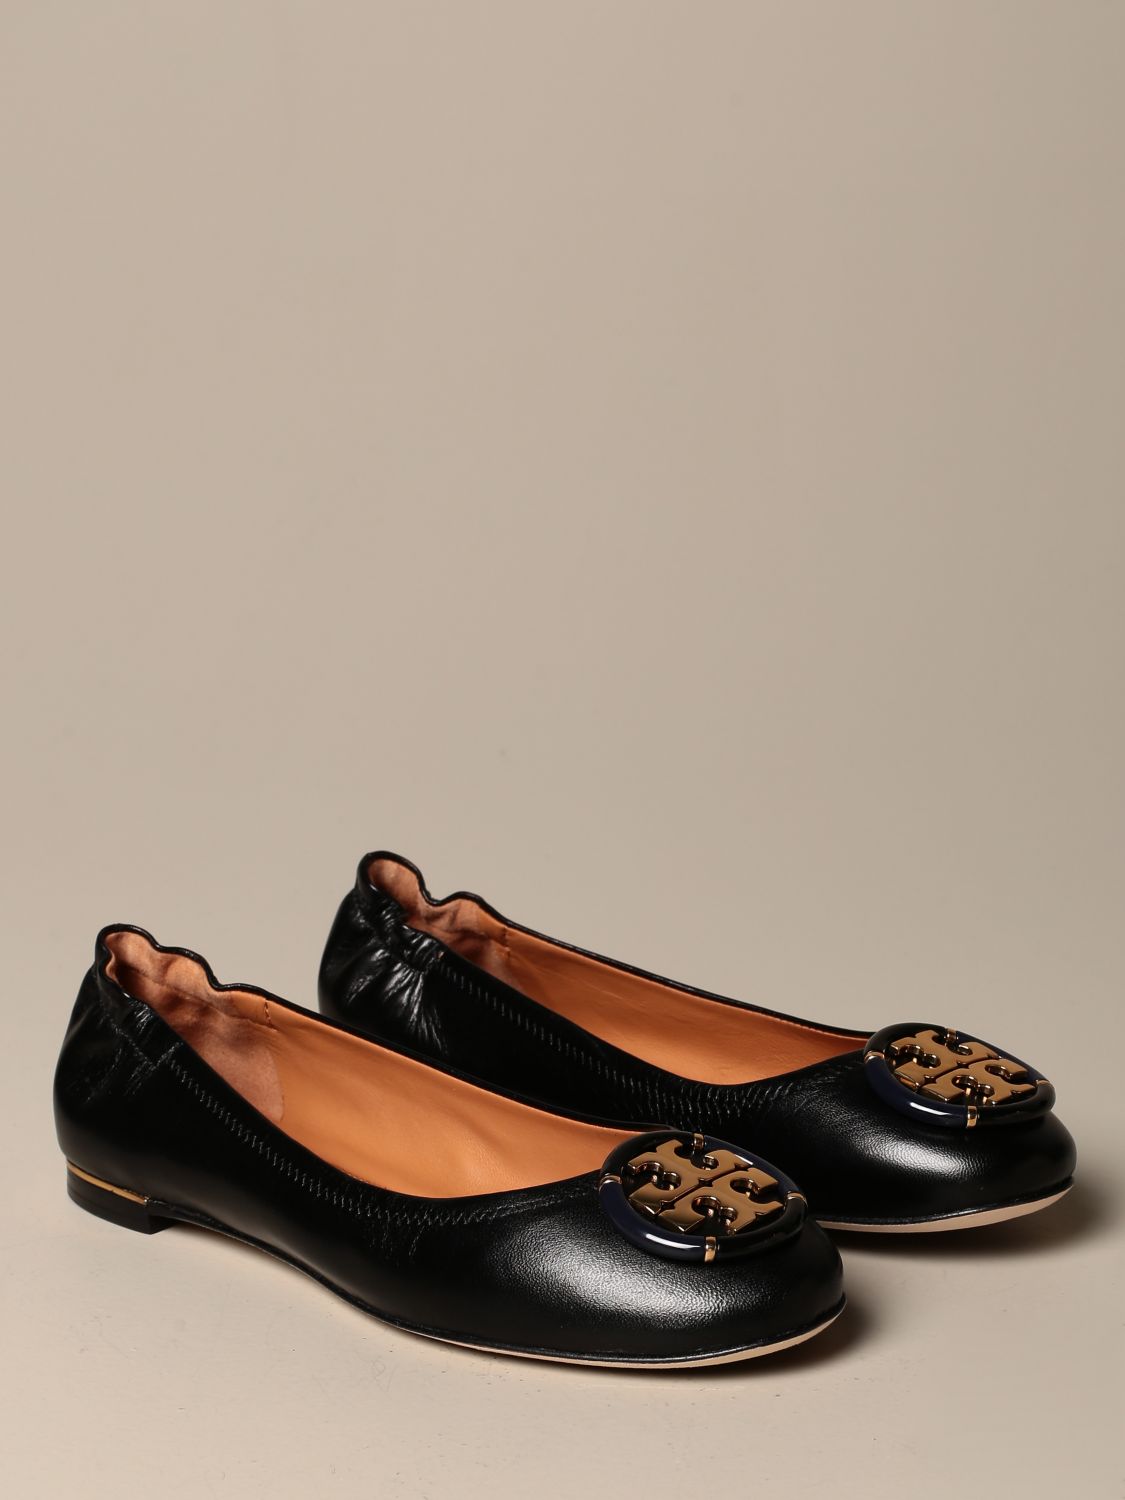 TORY BURCH: Minnie ballet flat in leather with logo - Black | Tory Burch  ballet flats 74062 online on 